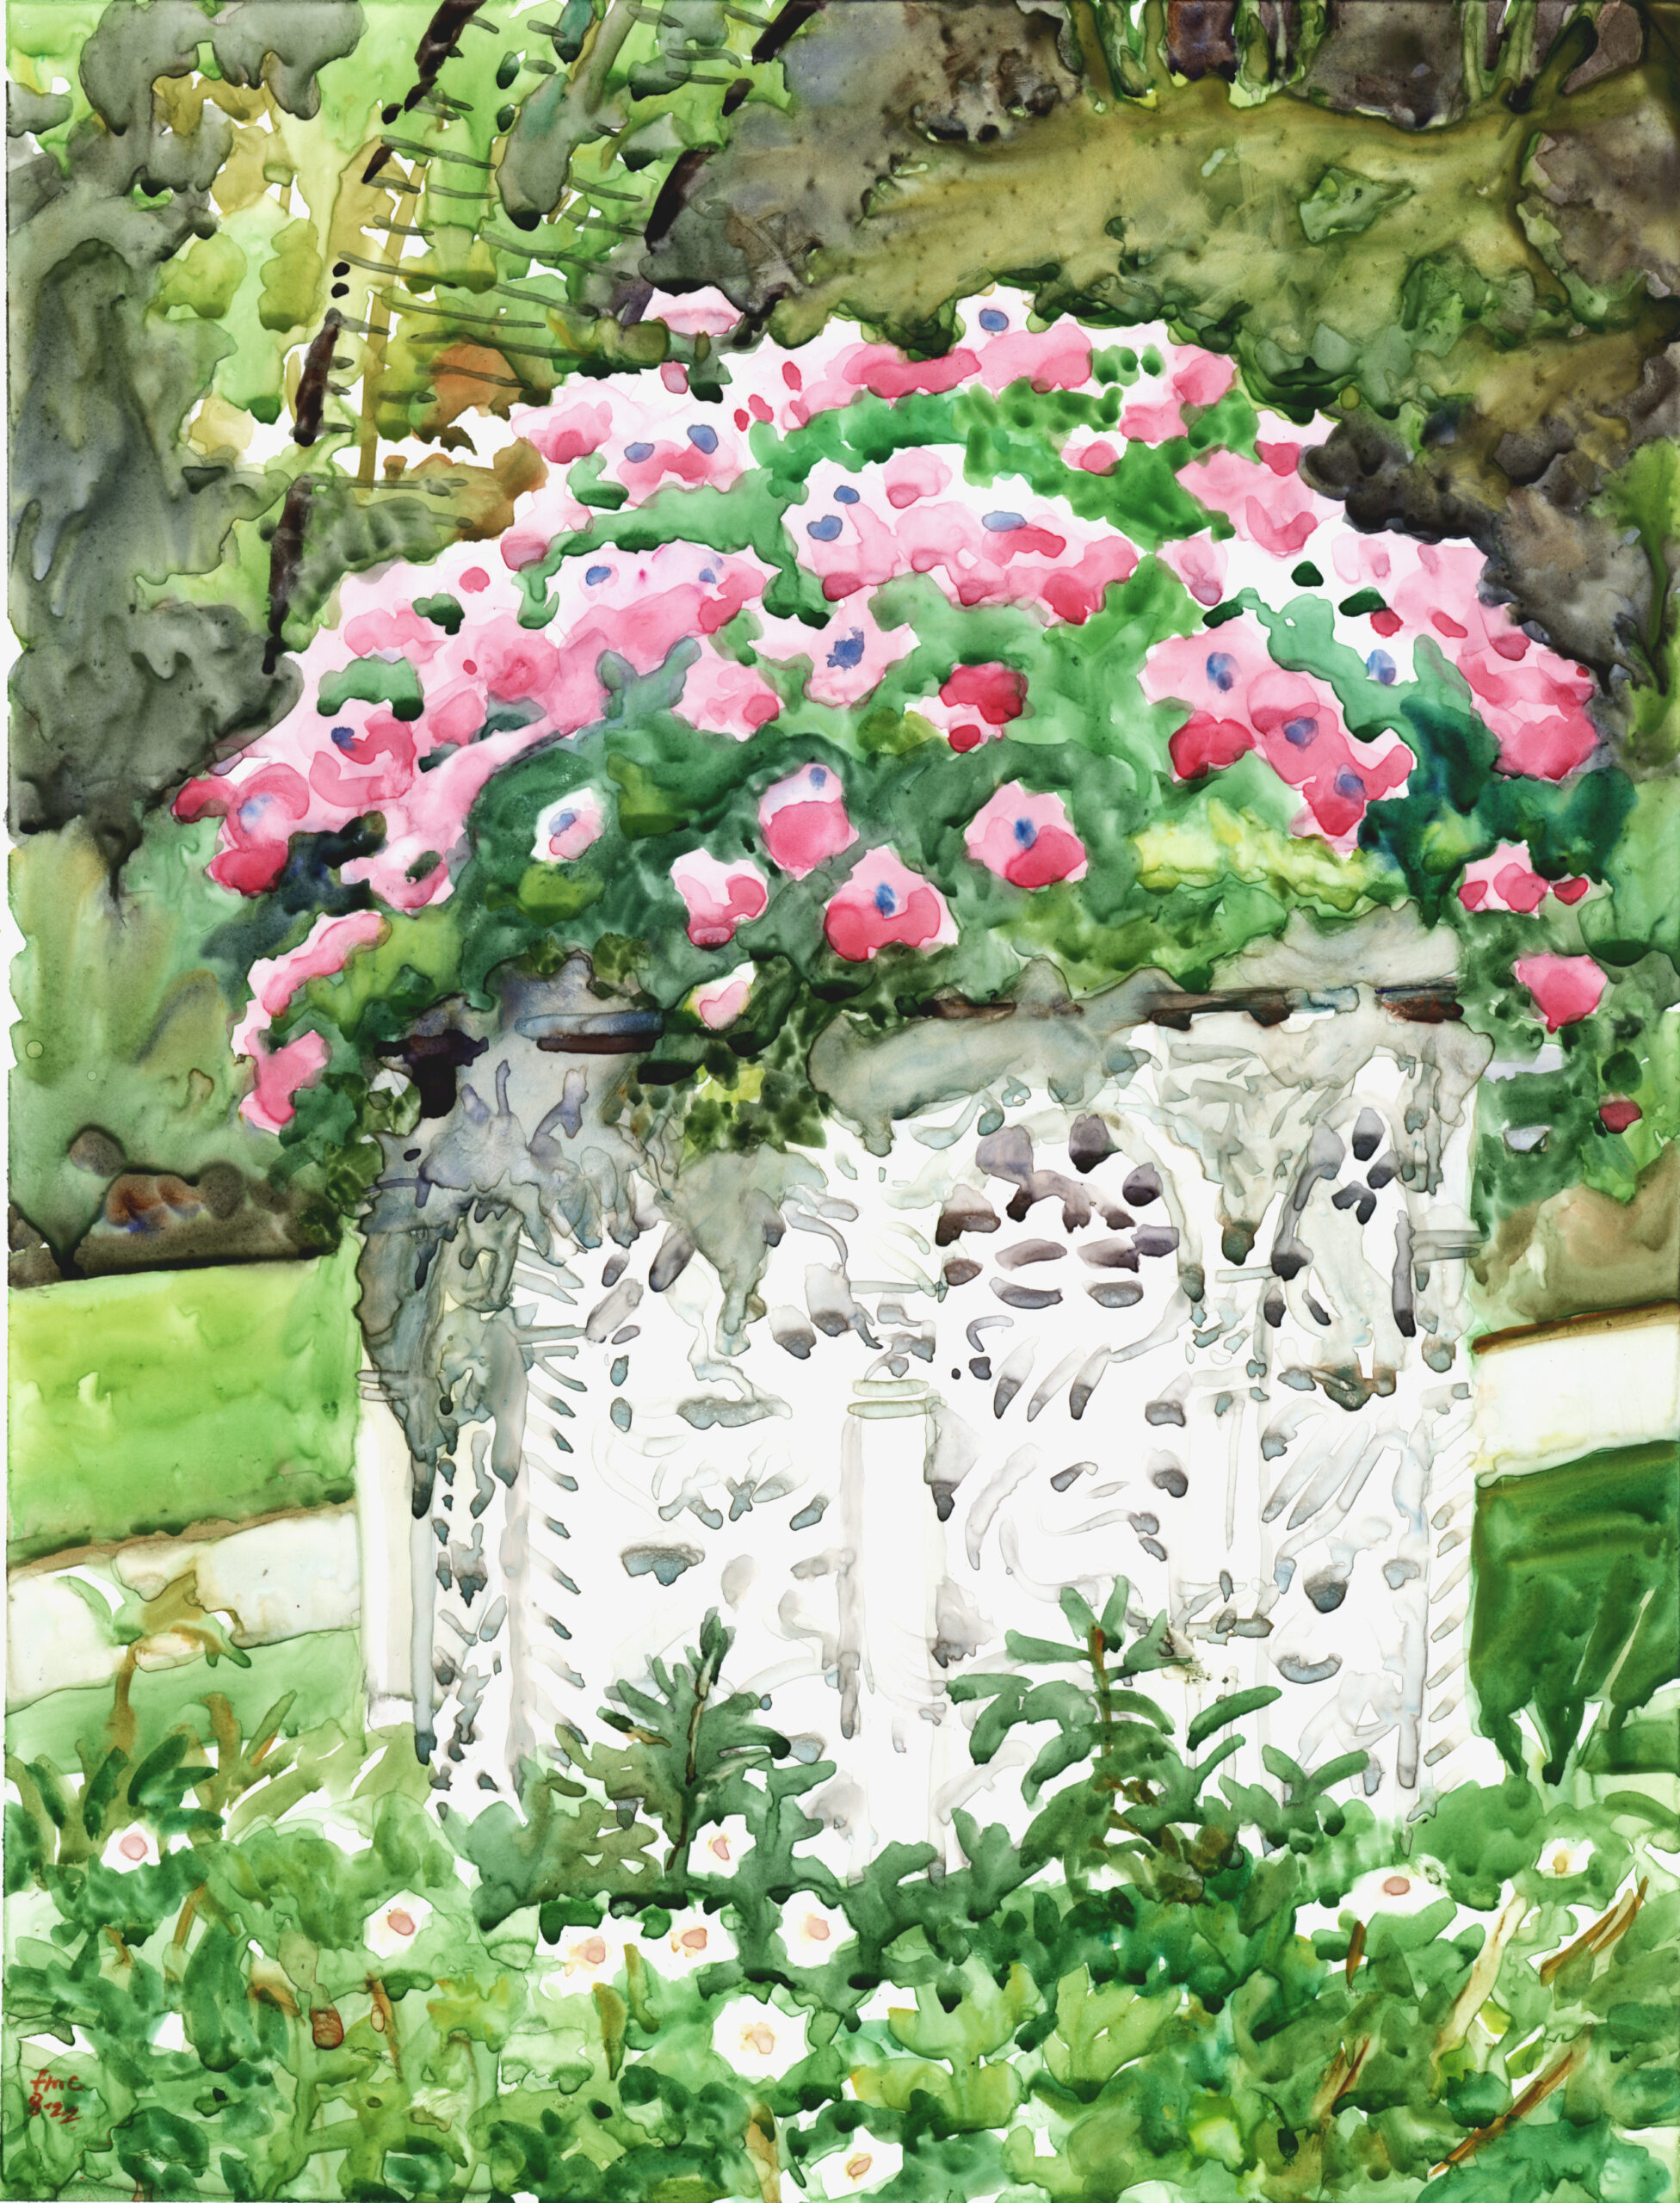 Effusive Floral Urn - en plein air watercolor painting by Frank Costantino